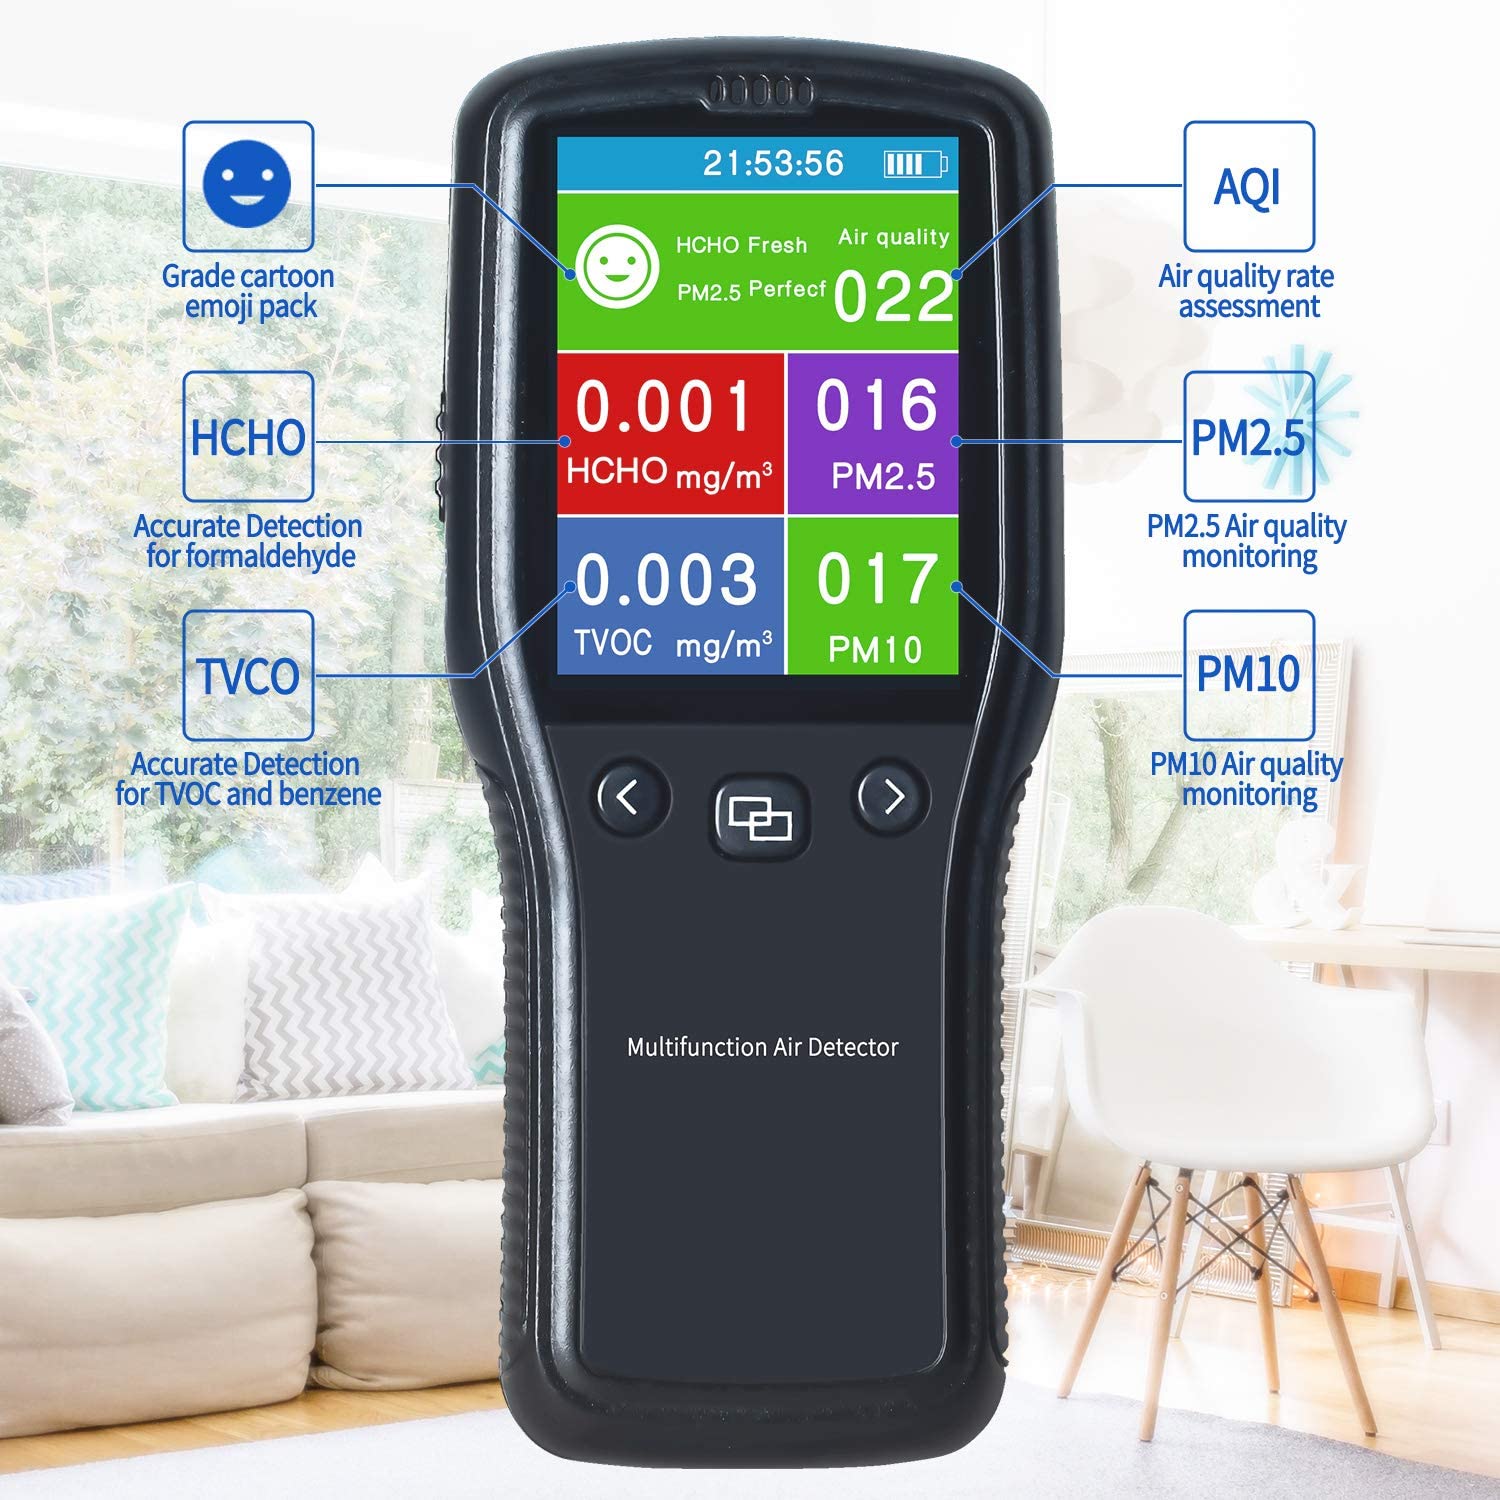 Multifunctional Indoor Formaldehyde Detector Air Quality Tester. (LNC)